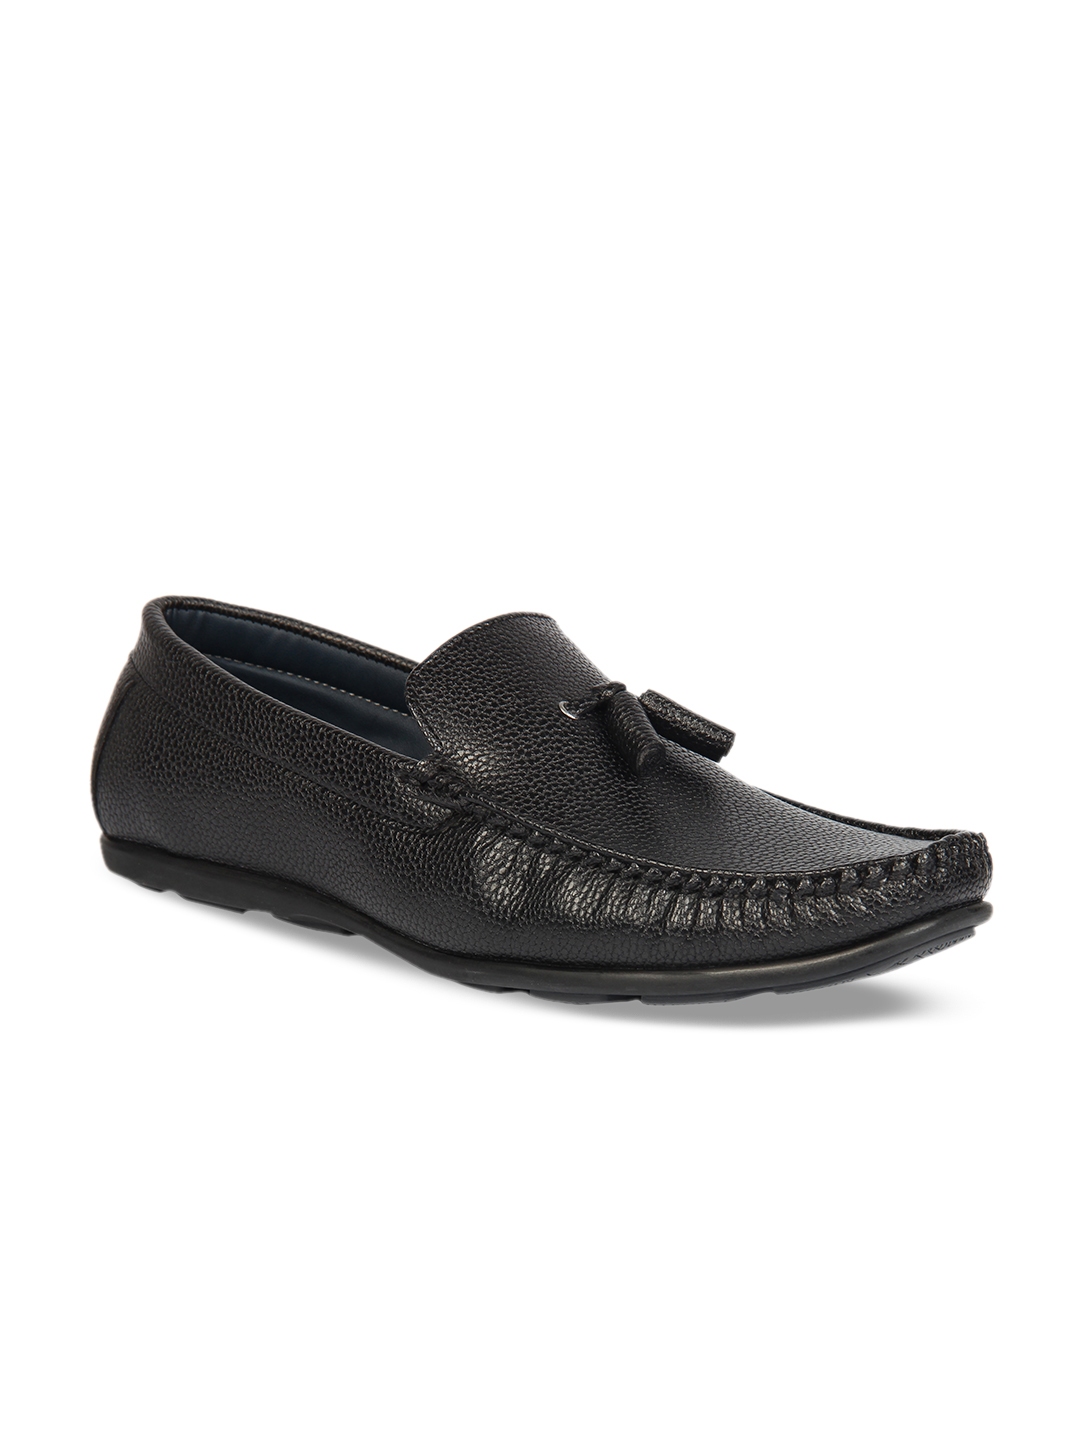 Buy Respiro Men Black Loafers - Casual Shoes for Men 8594523 | Myntra